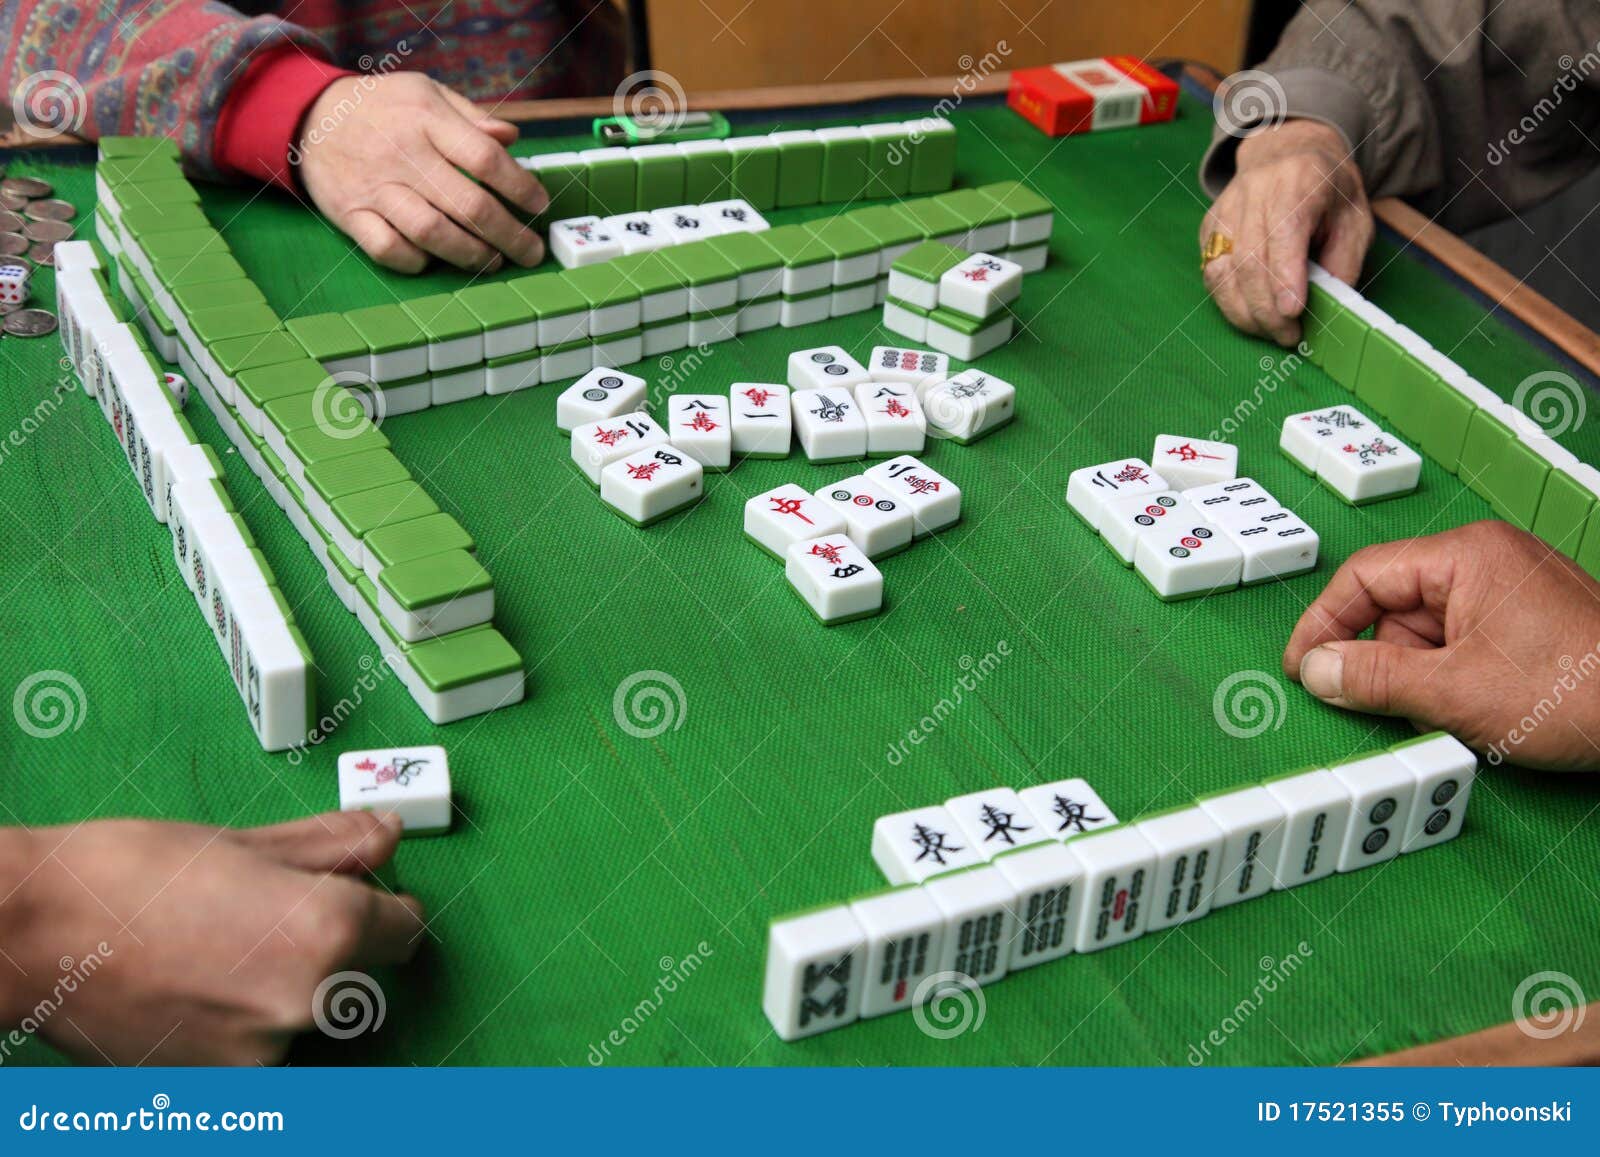 The Chinese game of Mahjong